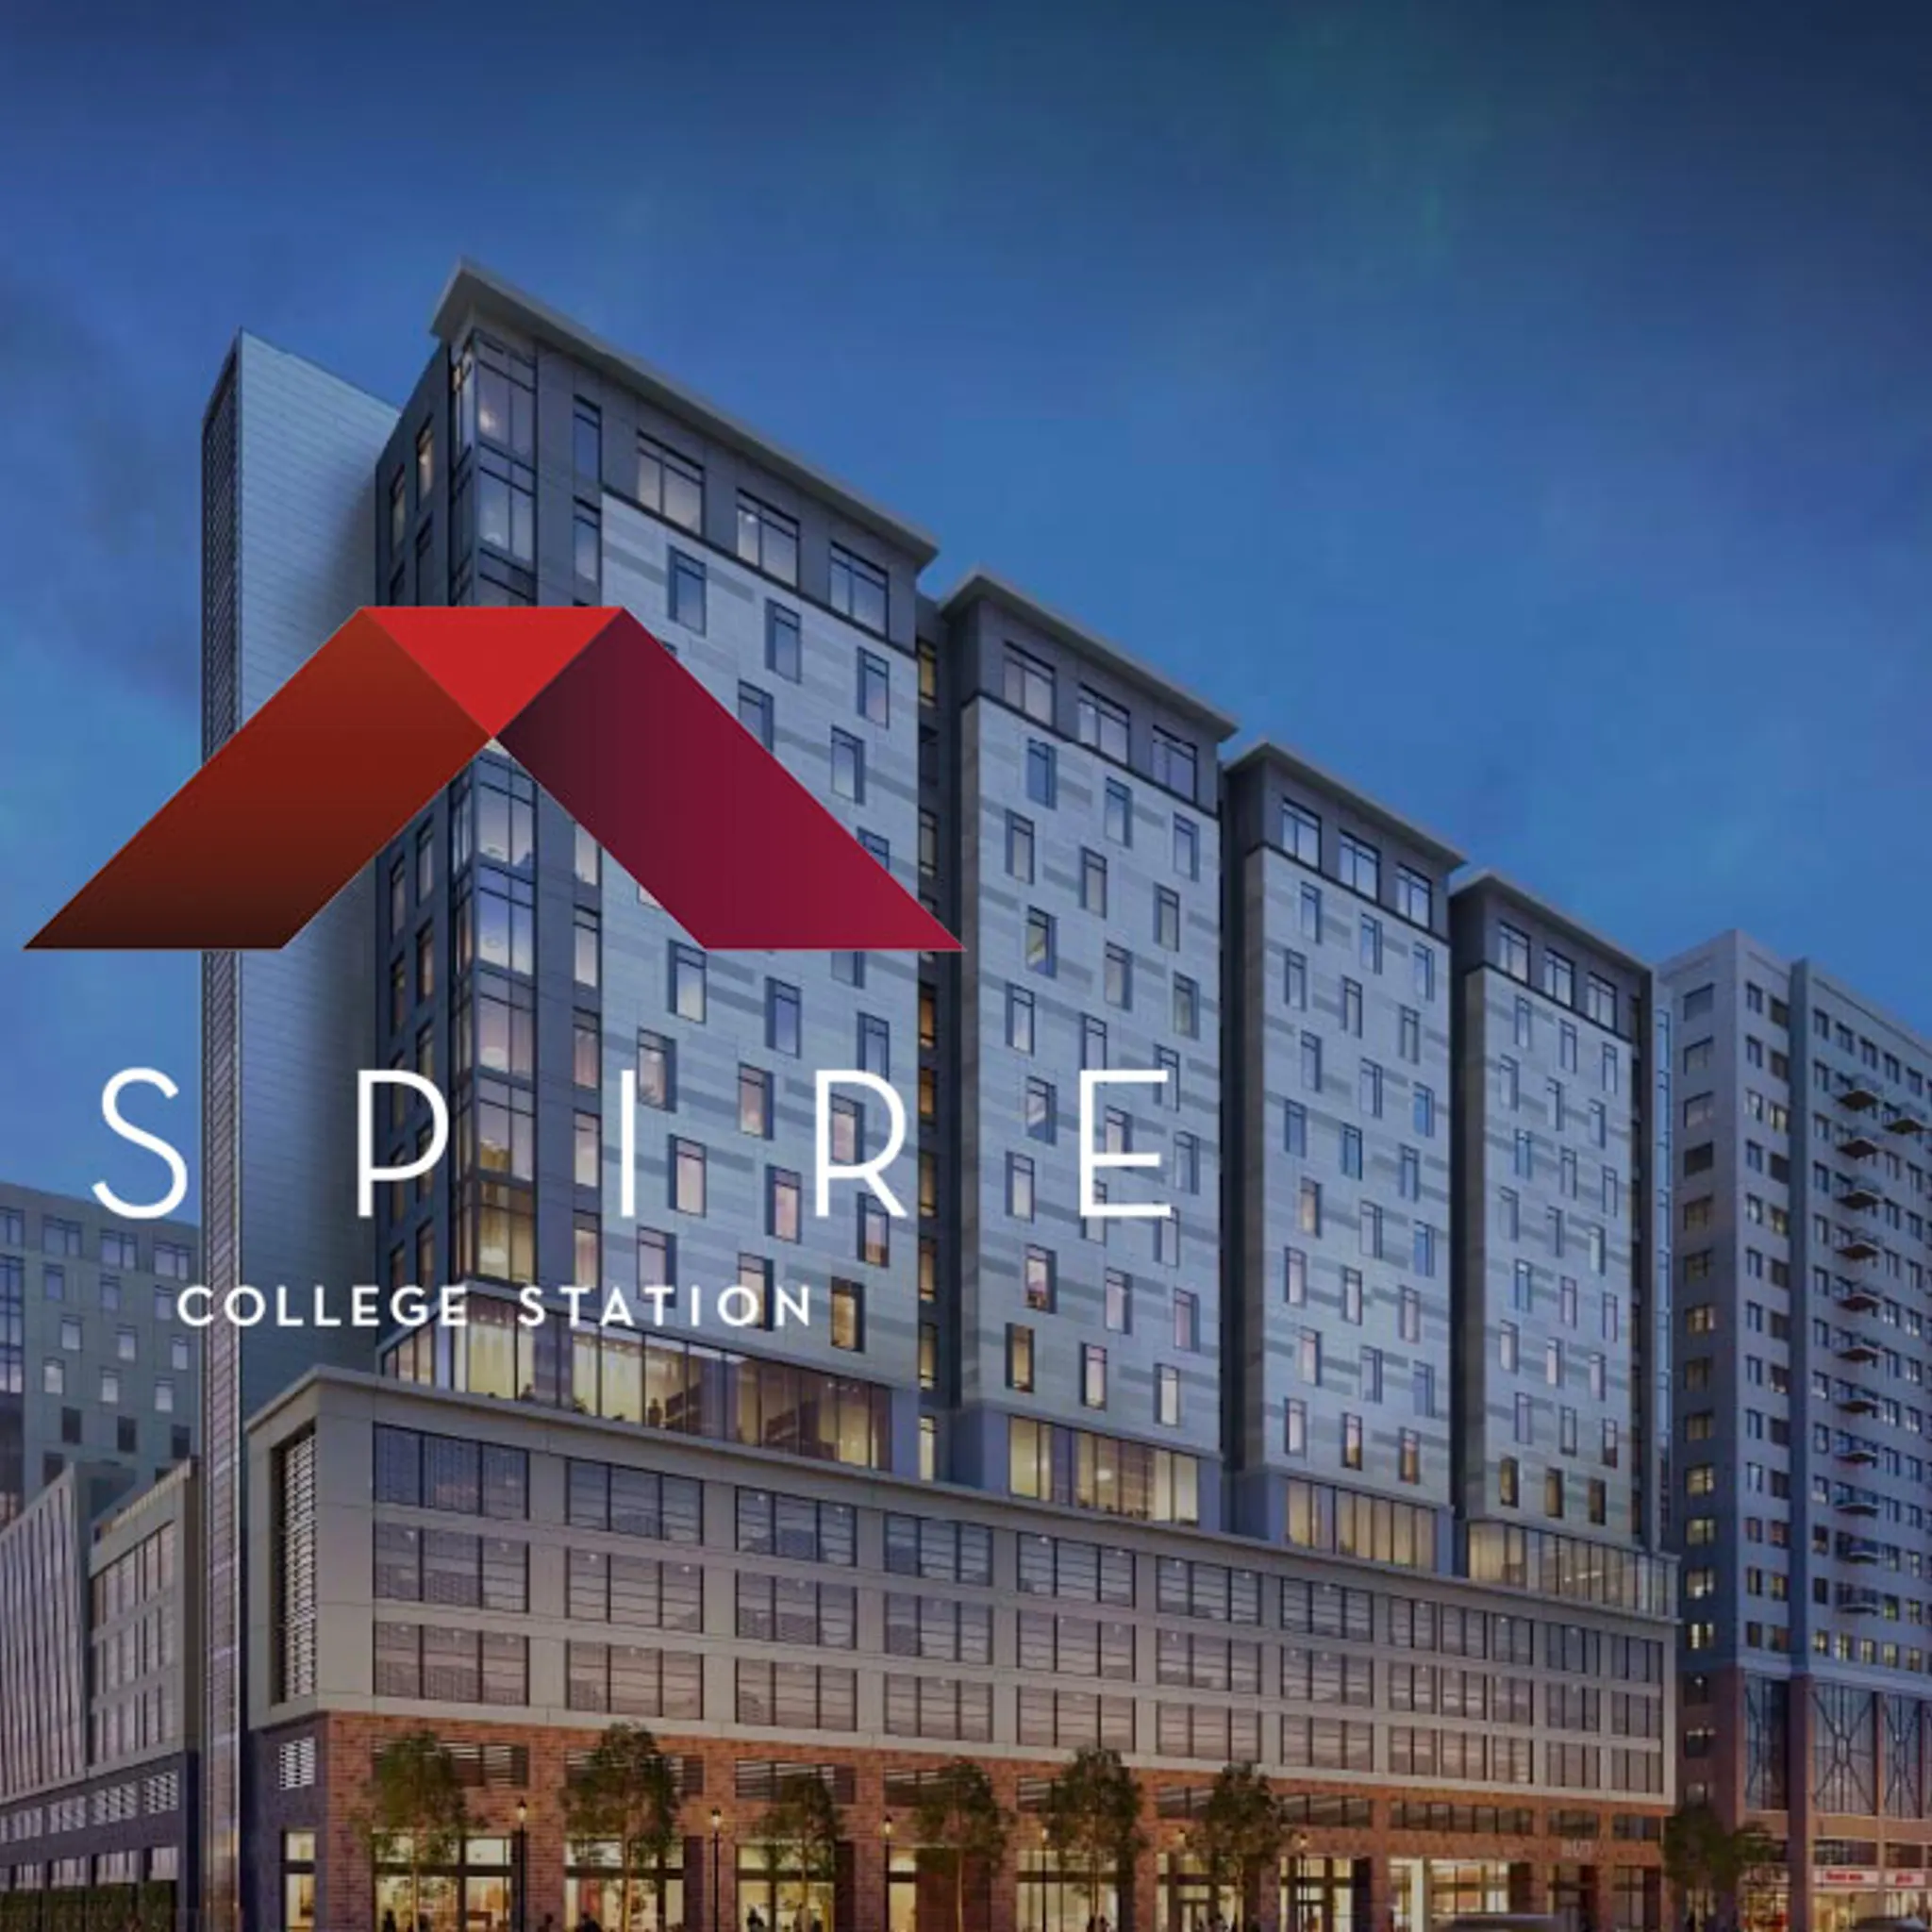 Aspire College Station: Luxury Apartments in College Station